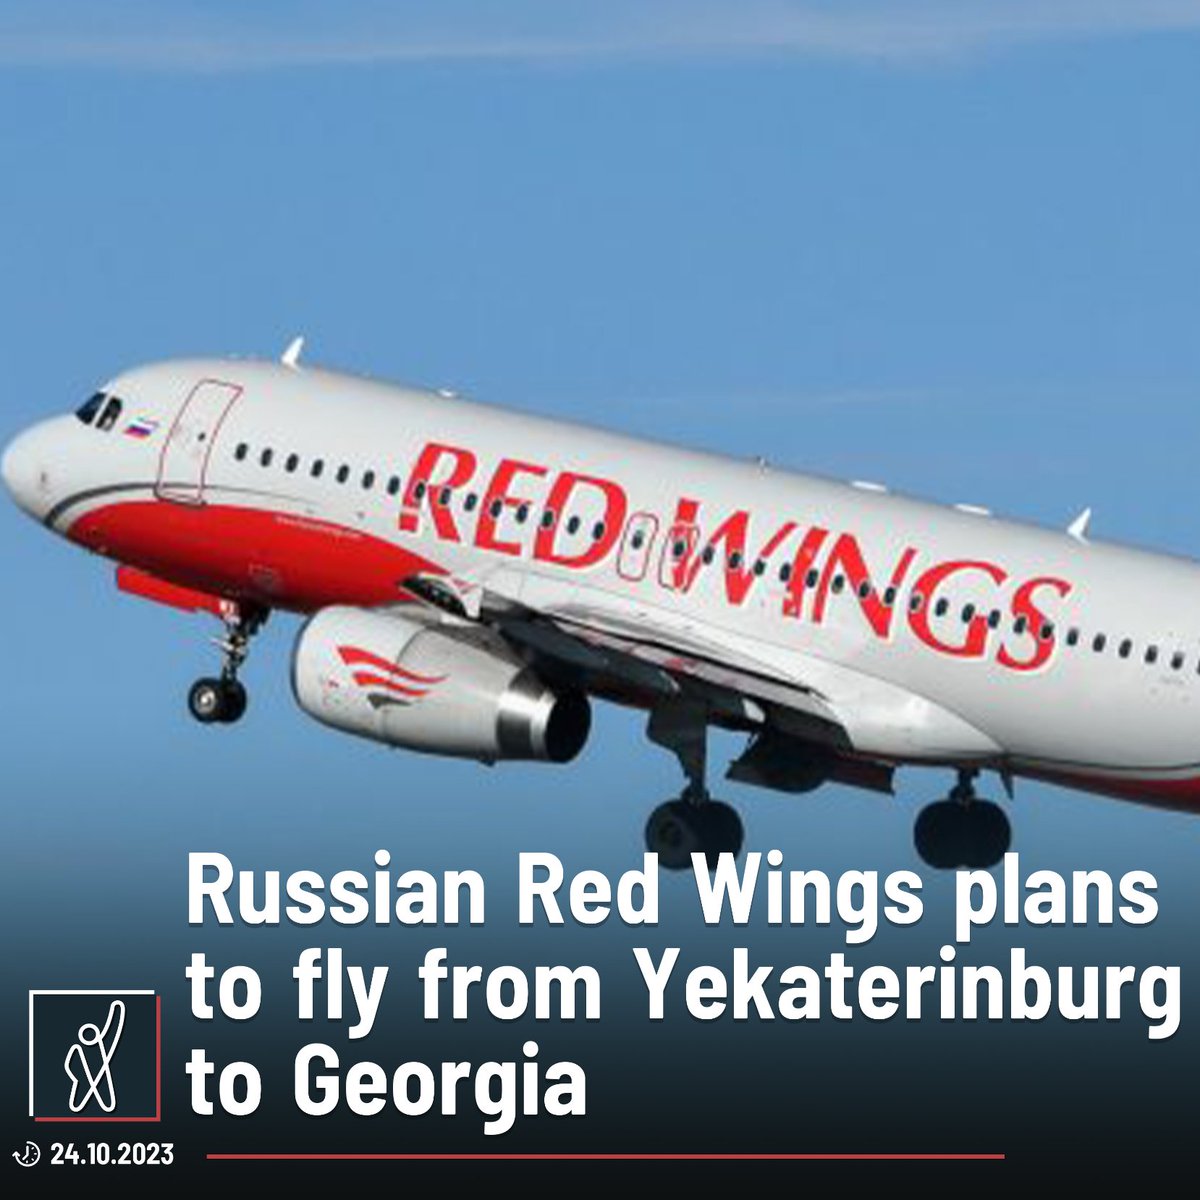 Direct flights from Yekaterinburg to Georgia will resume next week after a long break, President of the Ural Tourism Association Mikhail Maltsev said at a press conference. “Air traffic with Georgia is being restored. According to the resumed program, the first flight to Kutaisi…